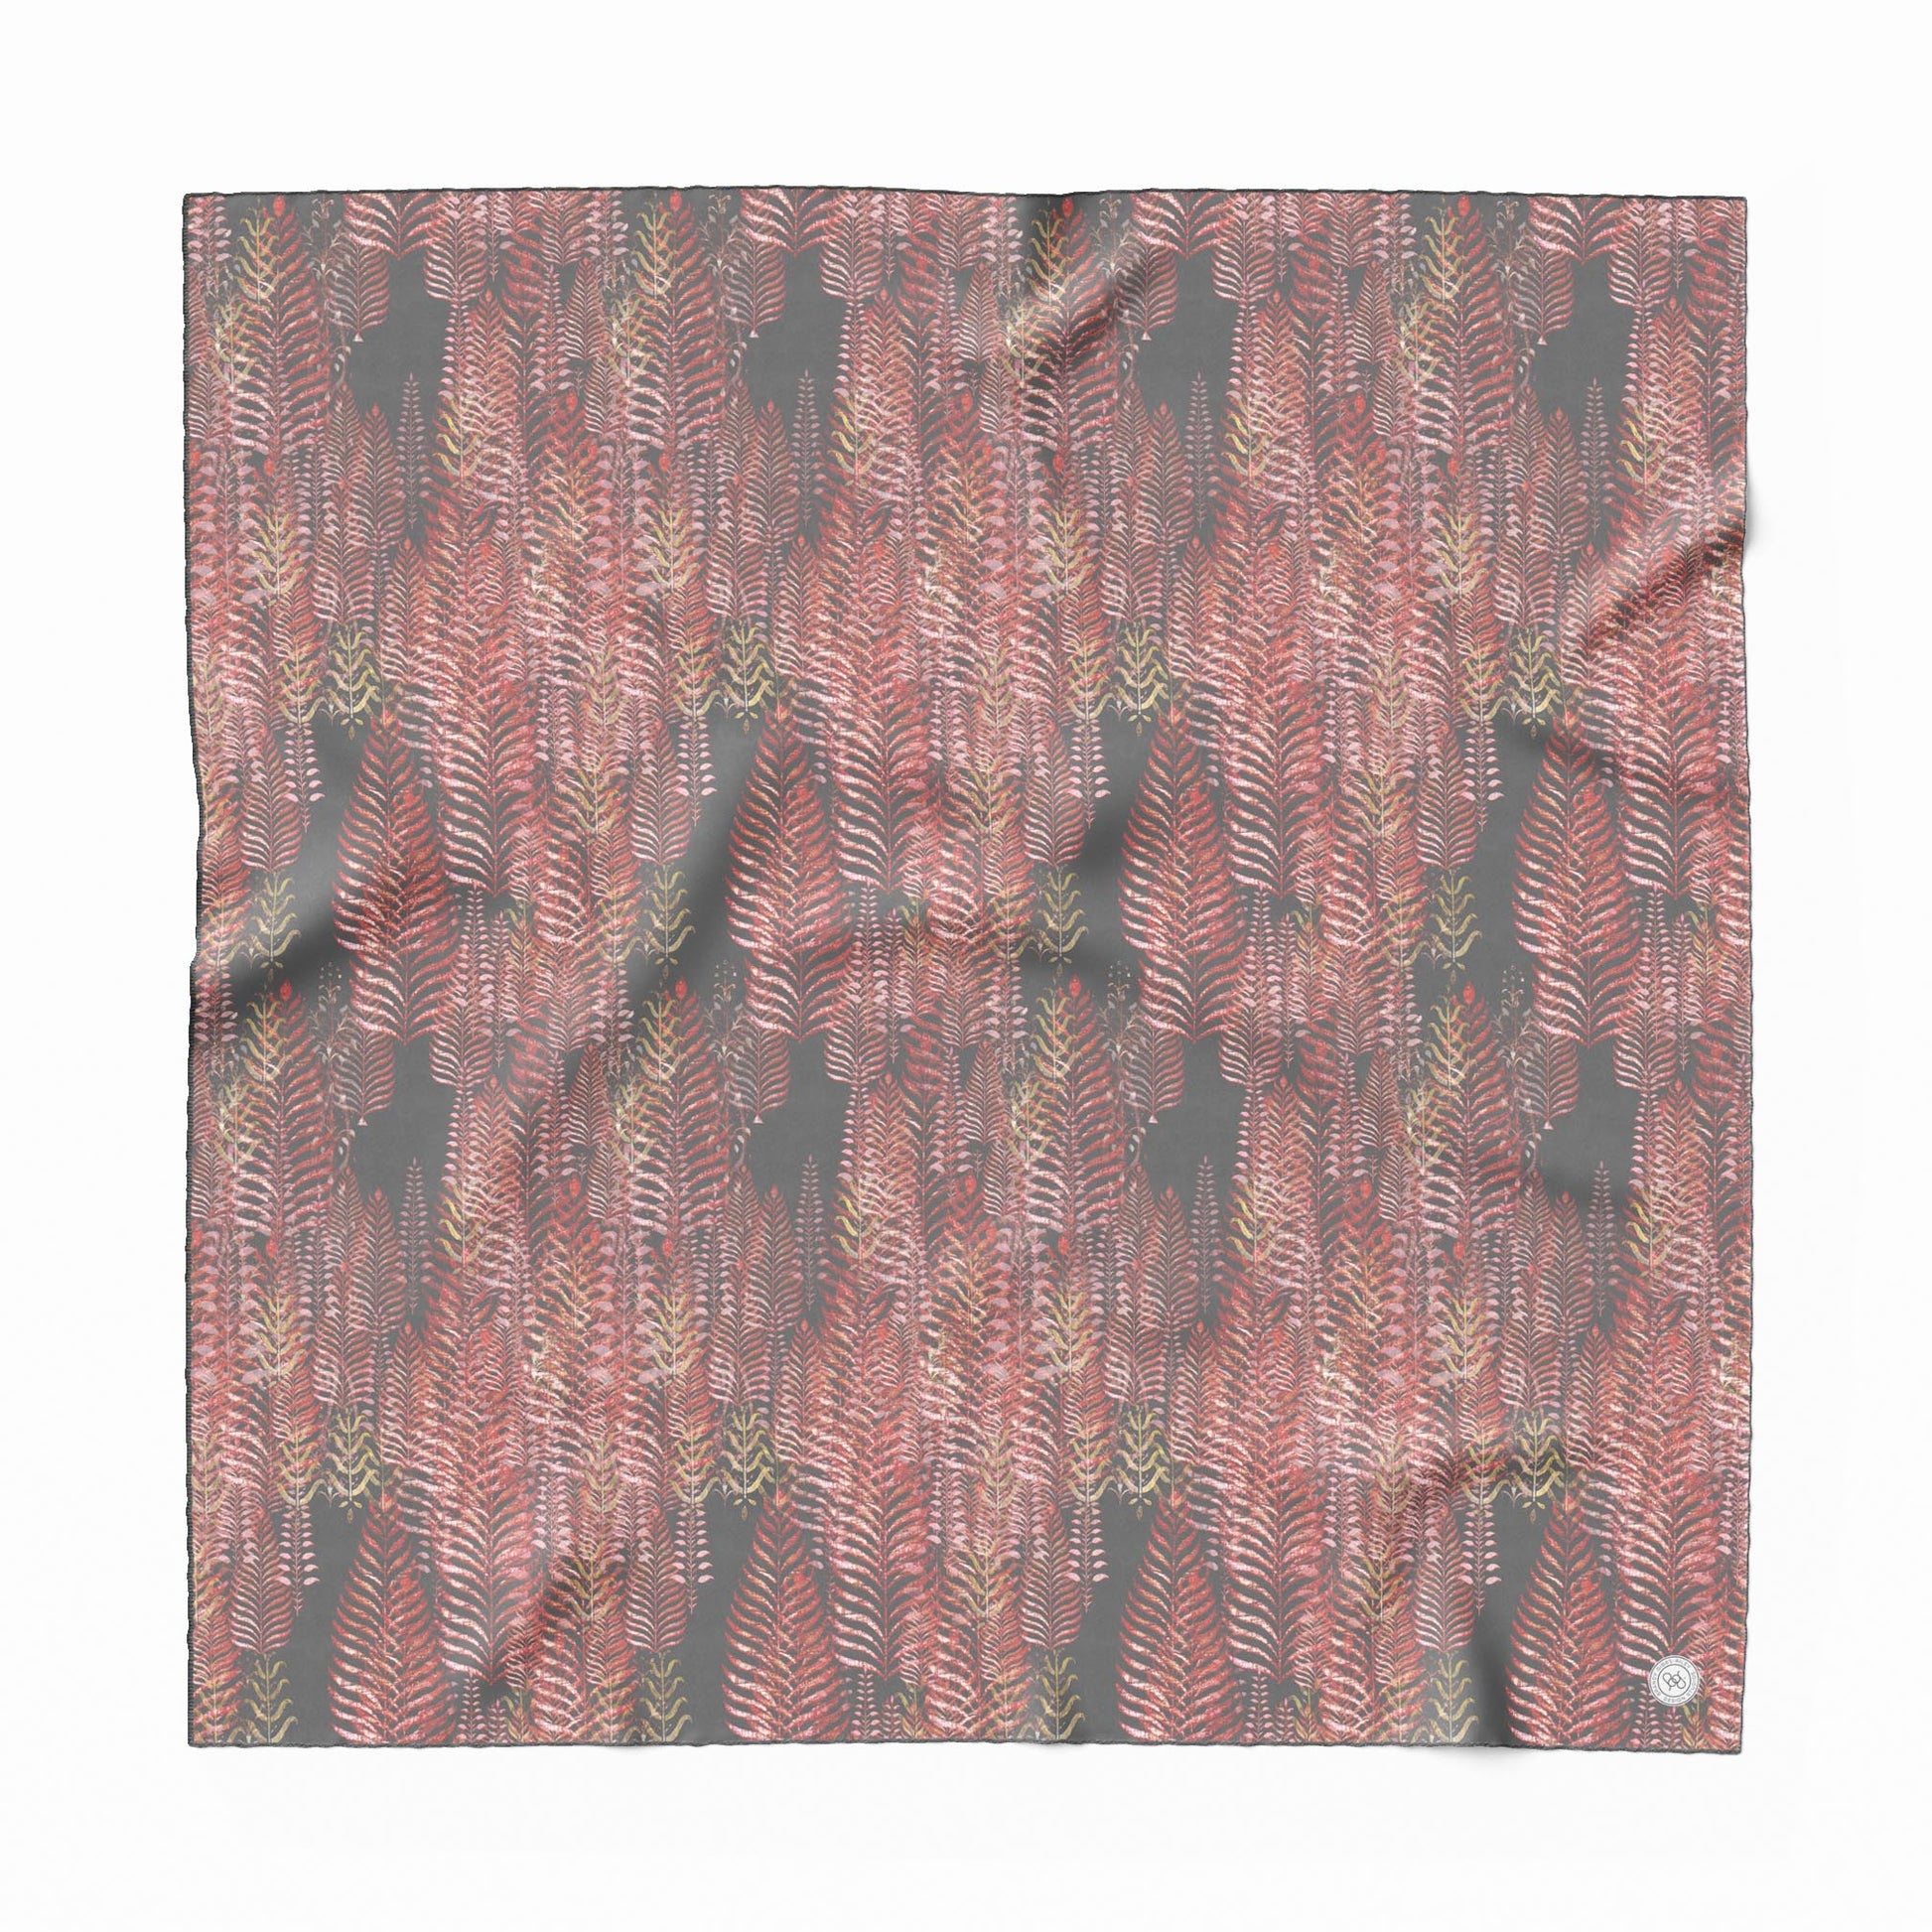 Silk scarf featuring a pink and gray woodblock pattern.